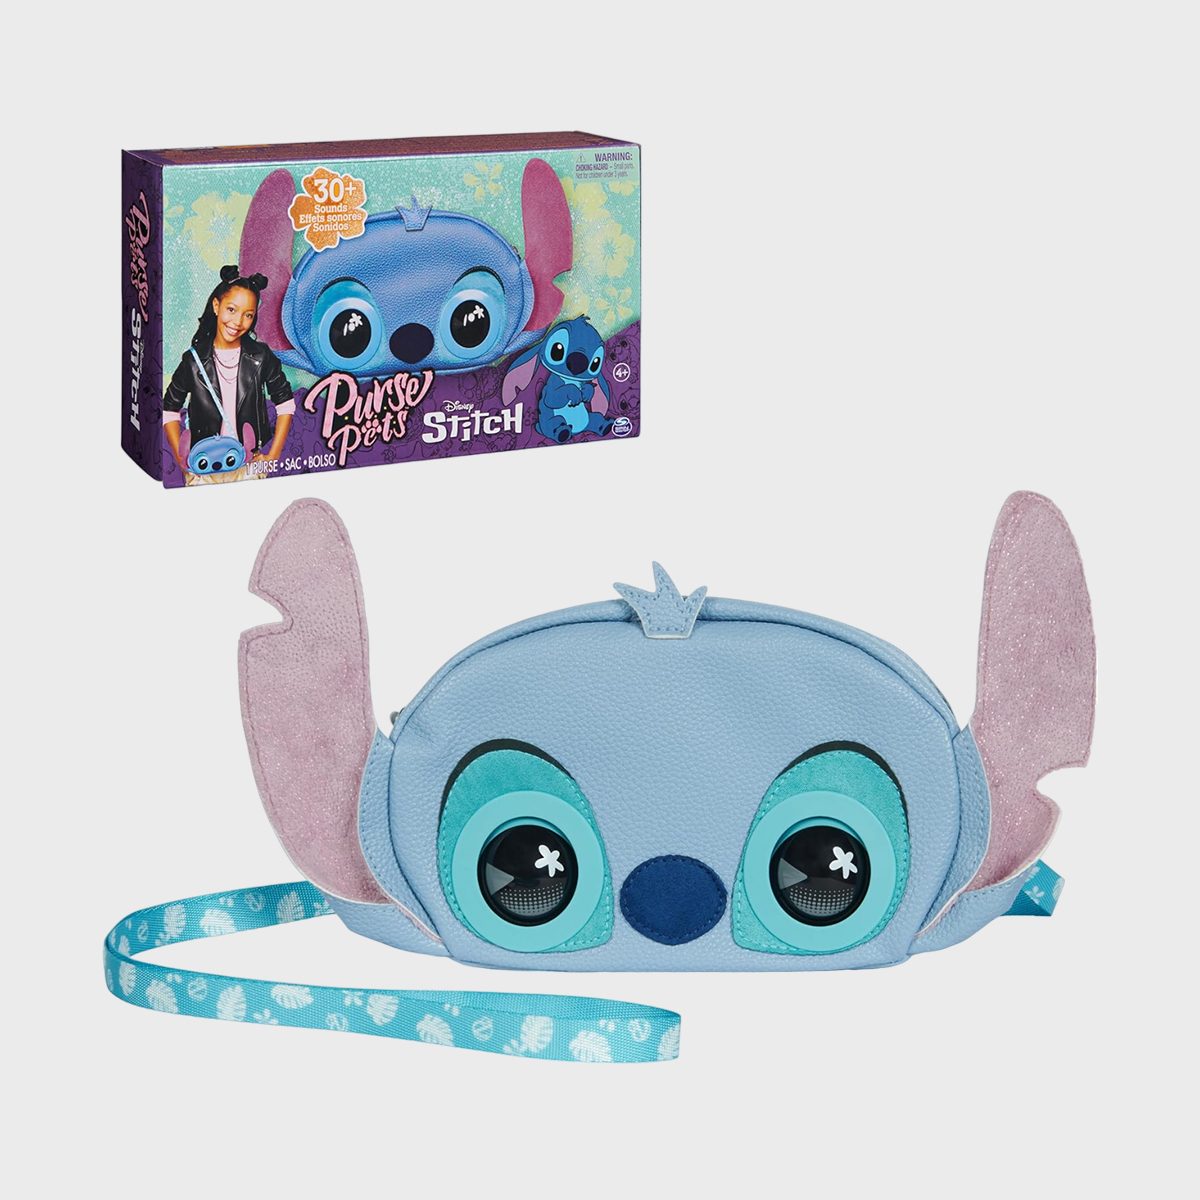 <p>Experiment 626 is here to help them elevate their style in the most adorable way! This <a href="https://www.amazon.com/Purse-Pets-Interactive-Reactions-Crossbody/dp/B0BRQY9Q42" rel="noopener noreferrer">interactive purse pet</a> will delight the most stylish kids as their favorite Disney character responds to their touch and uses his mischief meter to let her know how much he likes her style. Not only that, but this adorable <a href="https://www.rd.com/list/disney-gifts/" rel="noopener noreferrer">gift for Disney lovers</a> has over 30 sound and light effects, songs and games. Plus, it actually holds all of their treasures.</p> <p class="listicle-page__cta-button-shop"><a class="shop-btn" href="https://www.amazon.com/Purse-Pets-Interactive-Reactions-Crossbody/dp/B0BRQY9Q42/">Shop Now</a></p>